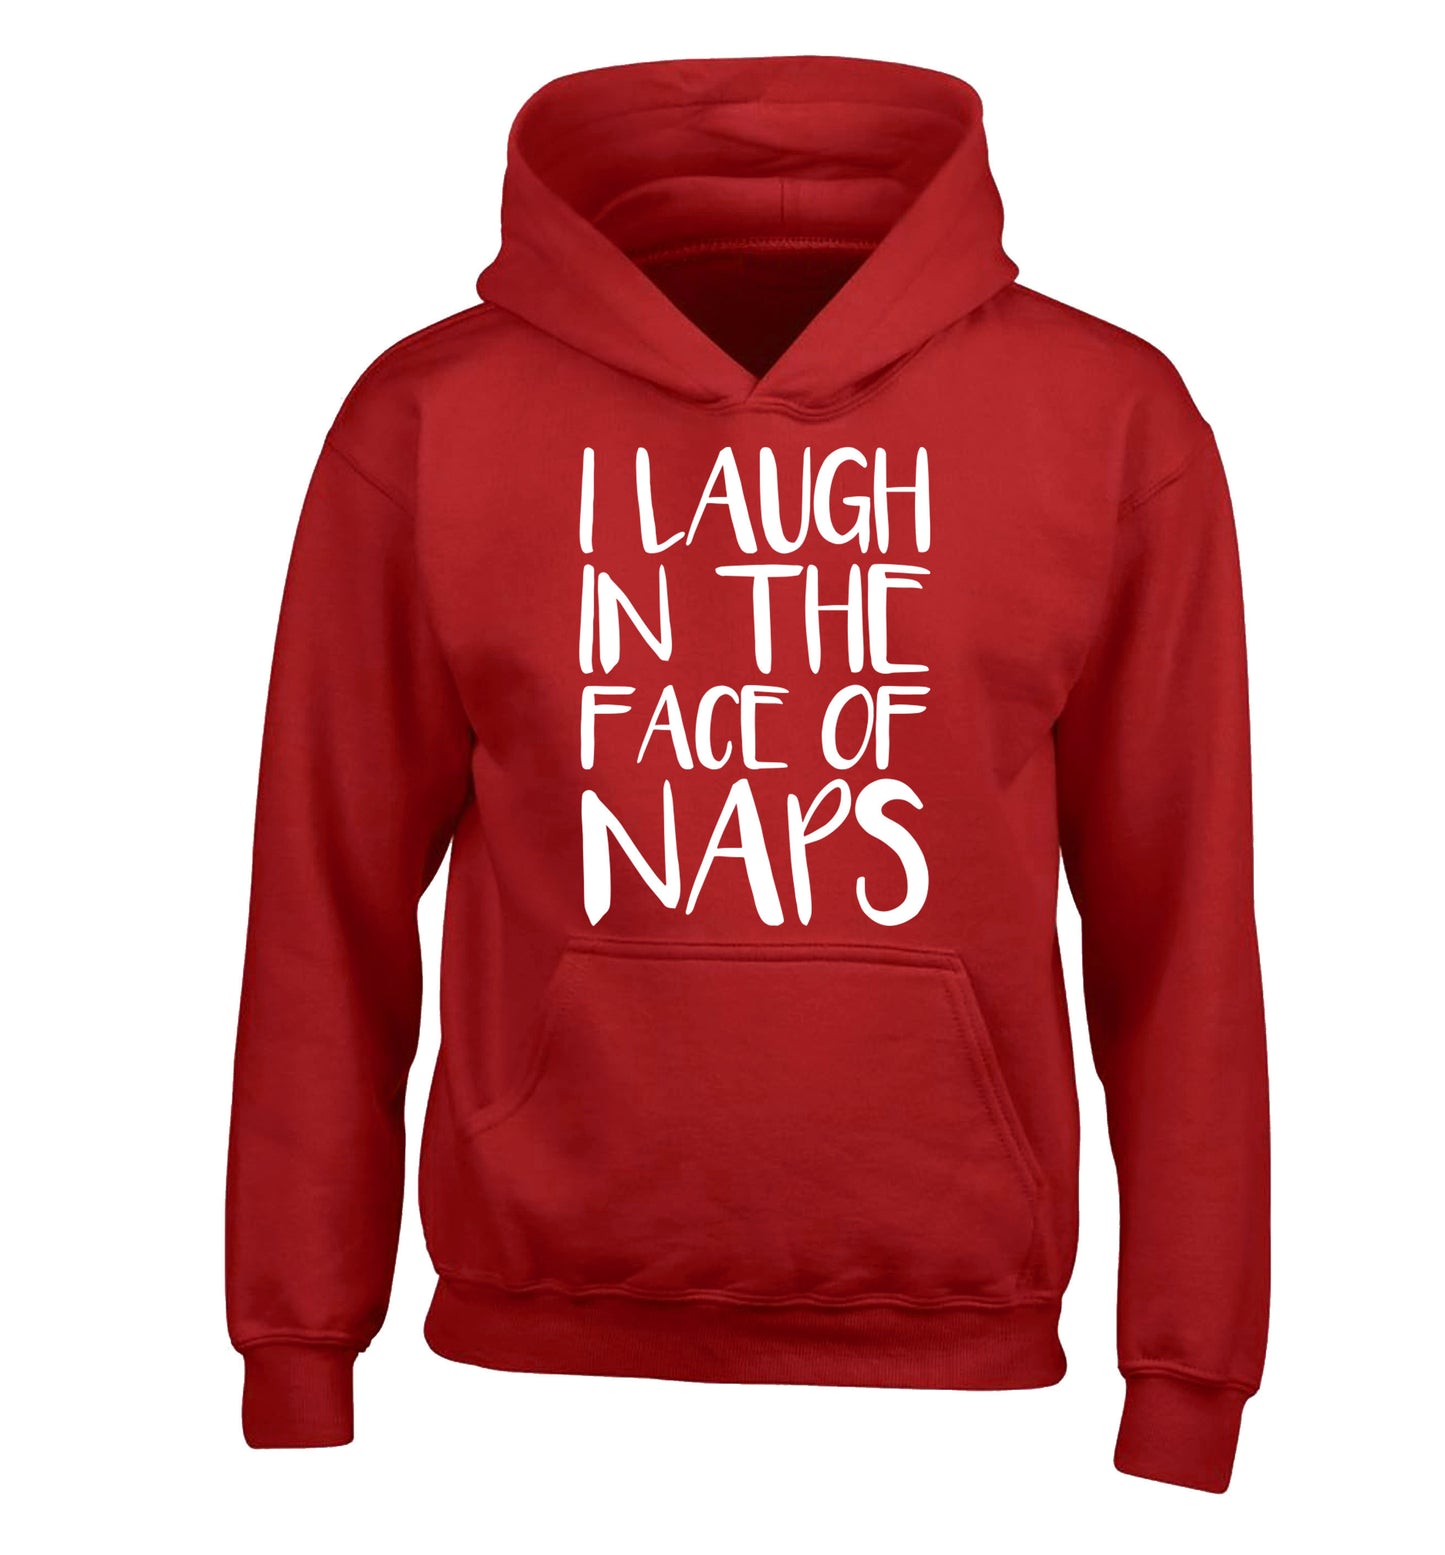 I laugh in the face of naps children's red hoodie 12-14 Years